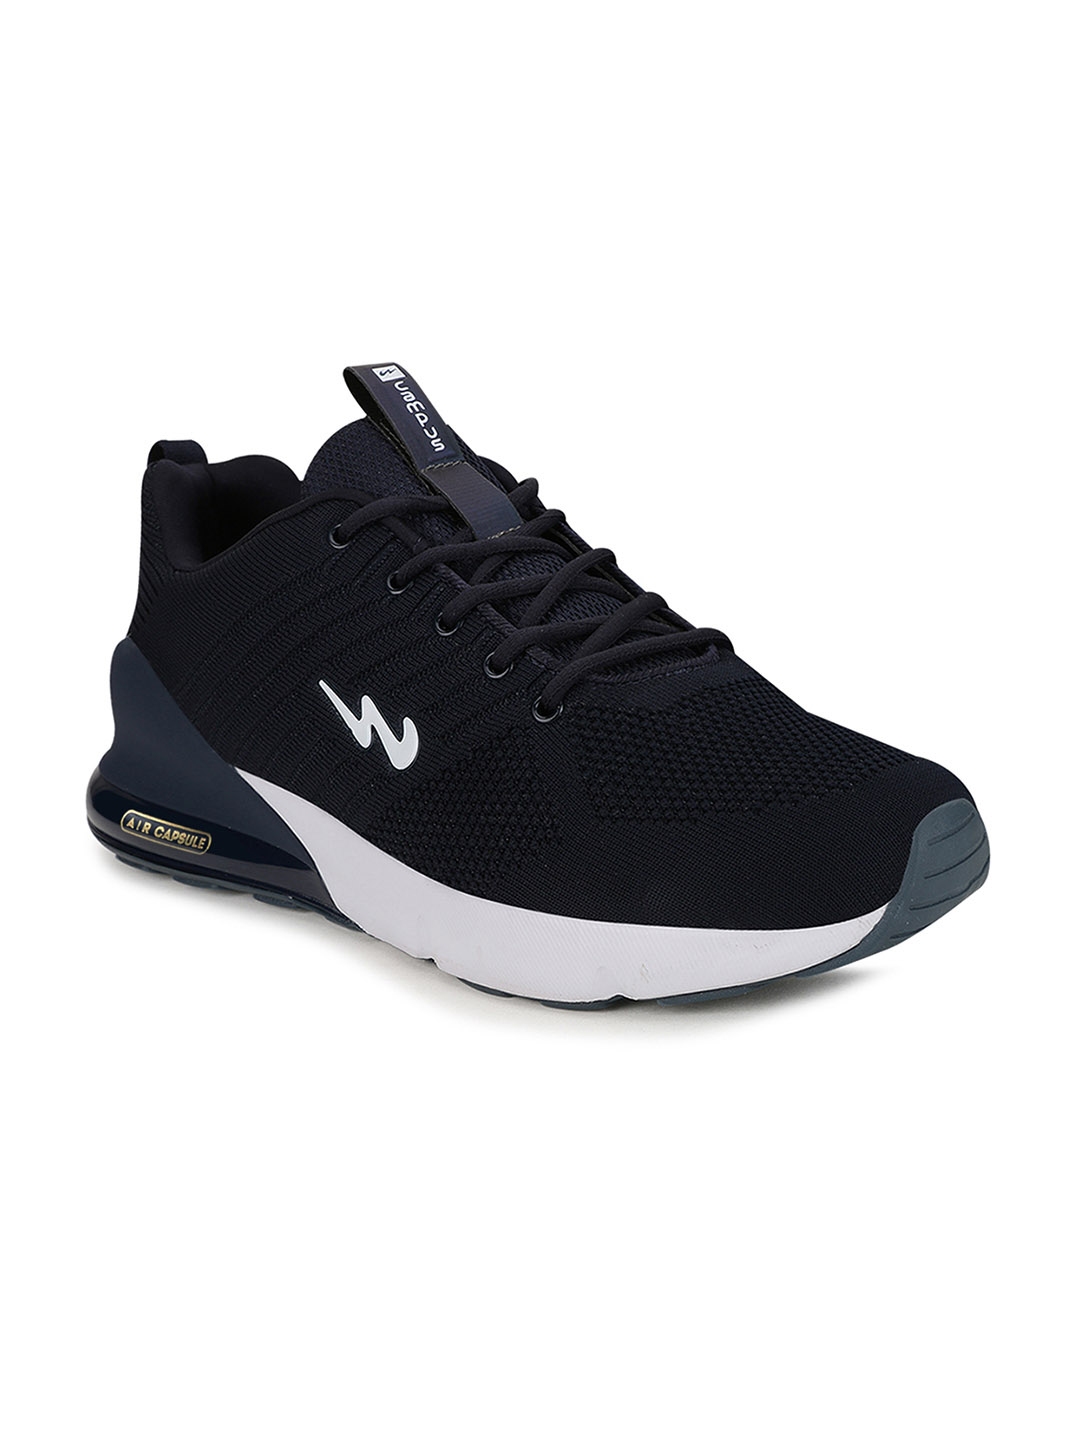 Buy Campus Men Navy Blue Running Shoes - Sports Shoes for Men 14336932 ...